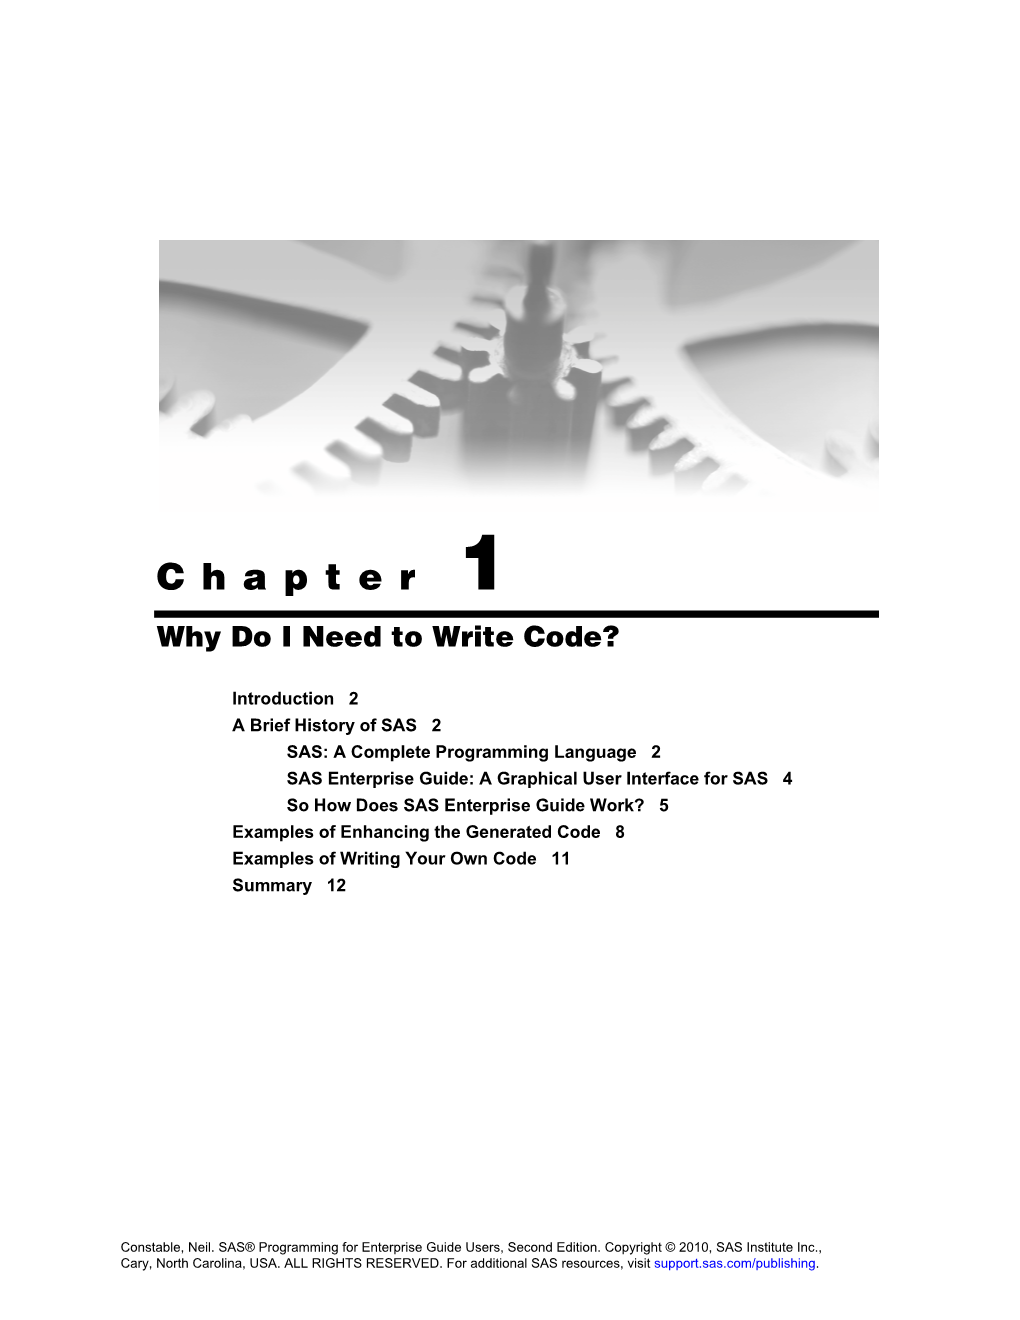 Chapter 1 Why Do I Need to Write Code?